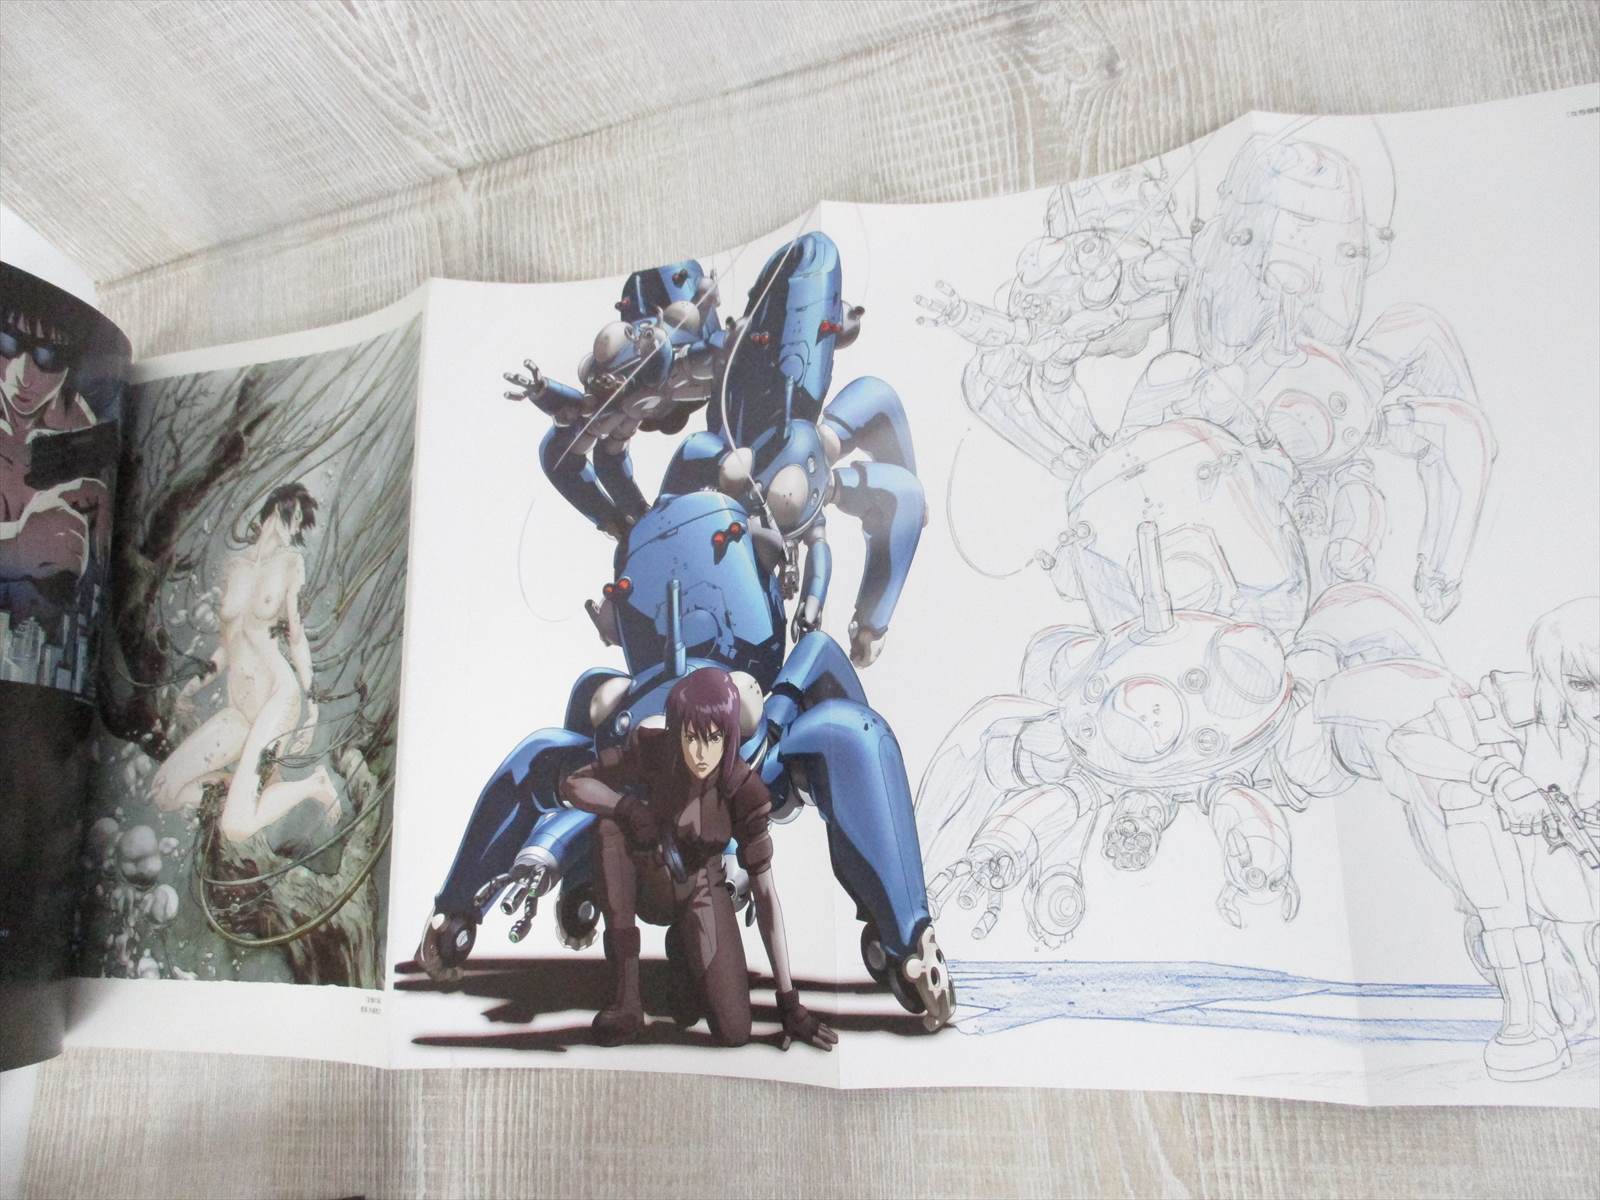 GHOST IN THE SHELL 2015 Exhibition Ltd Art Design Book SHIROW MASAMUNE